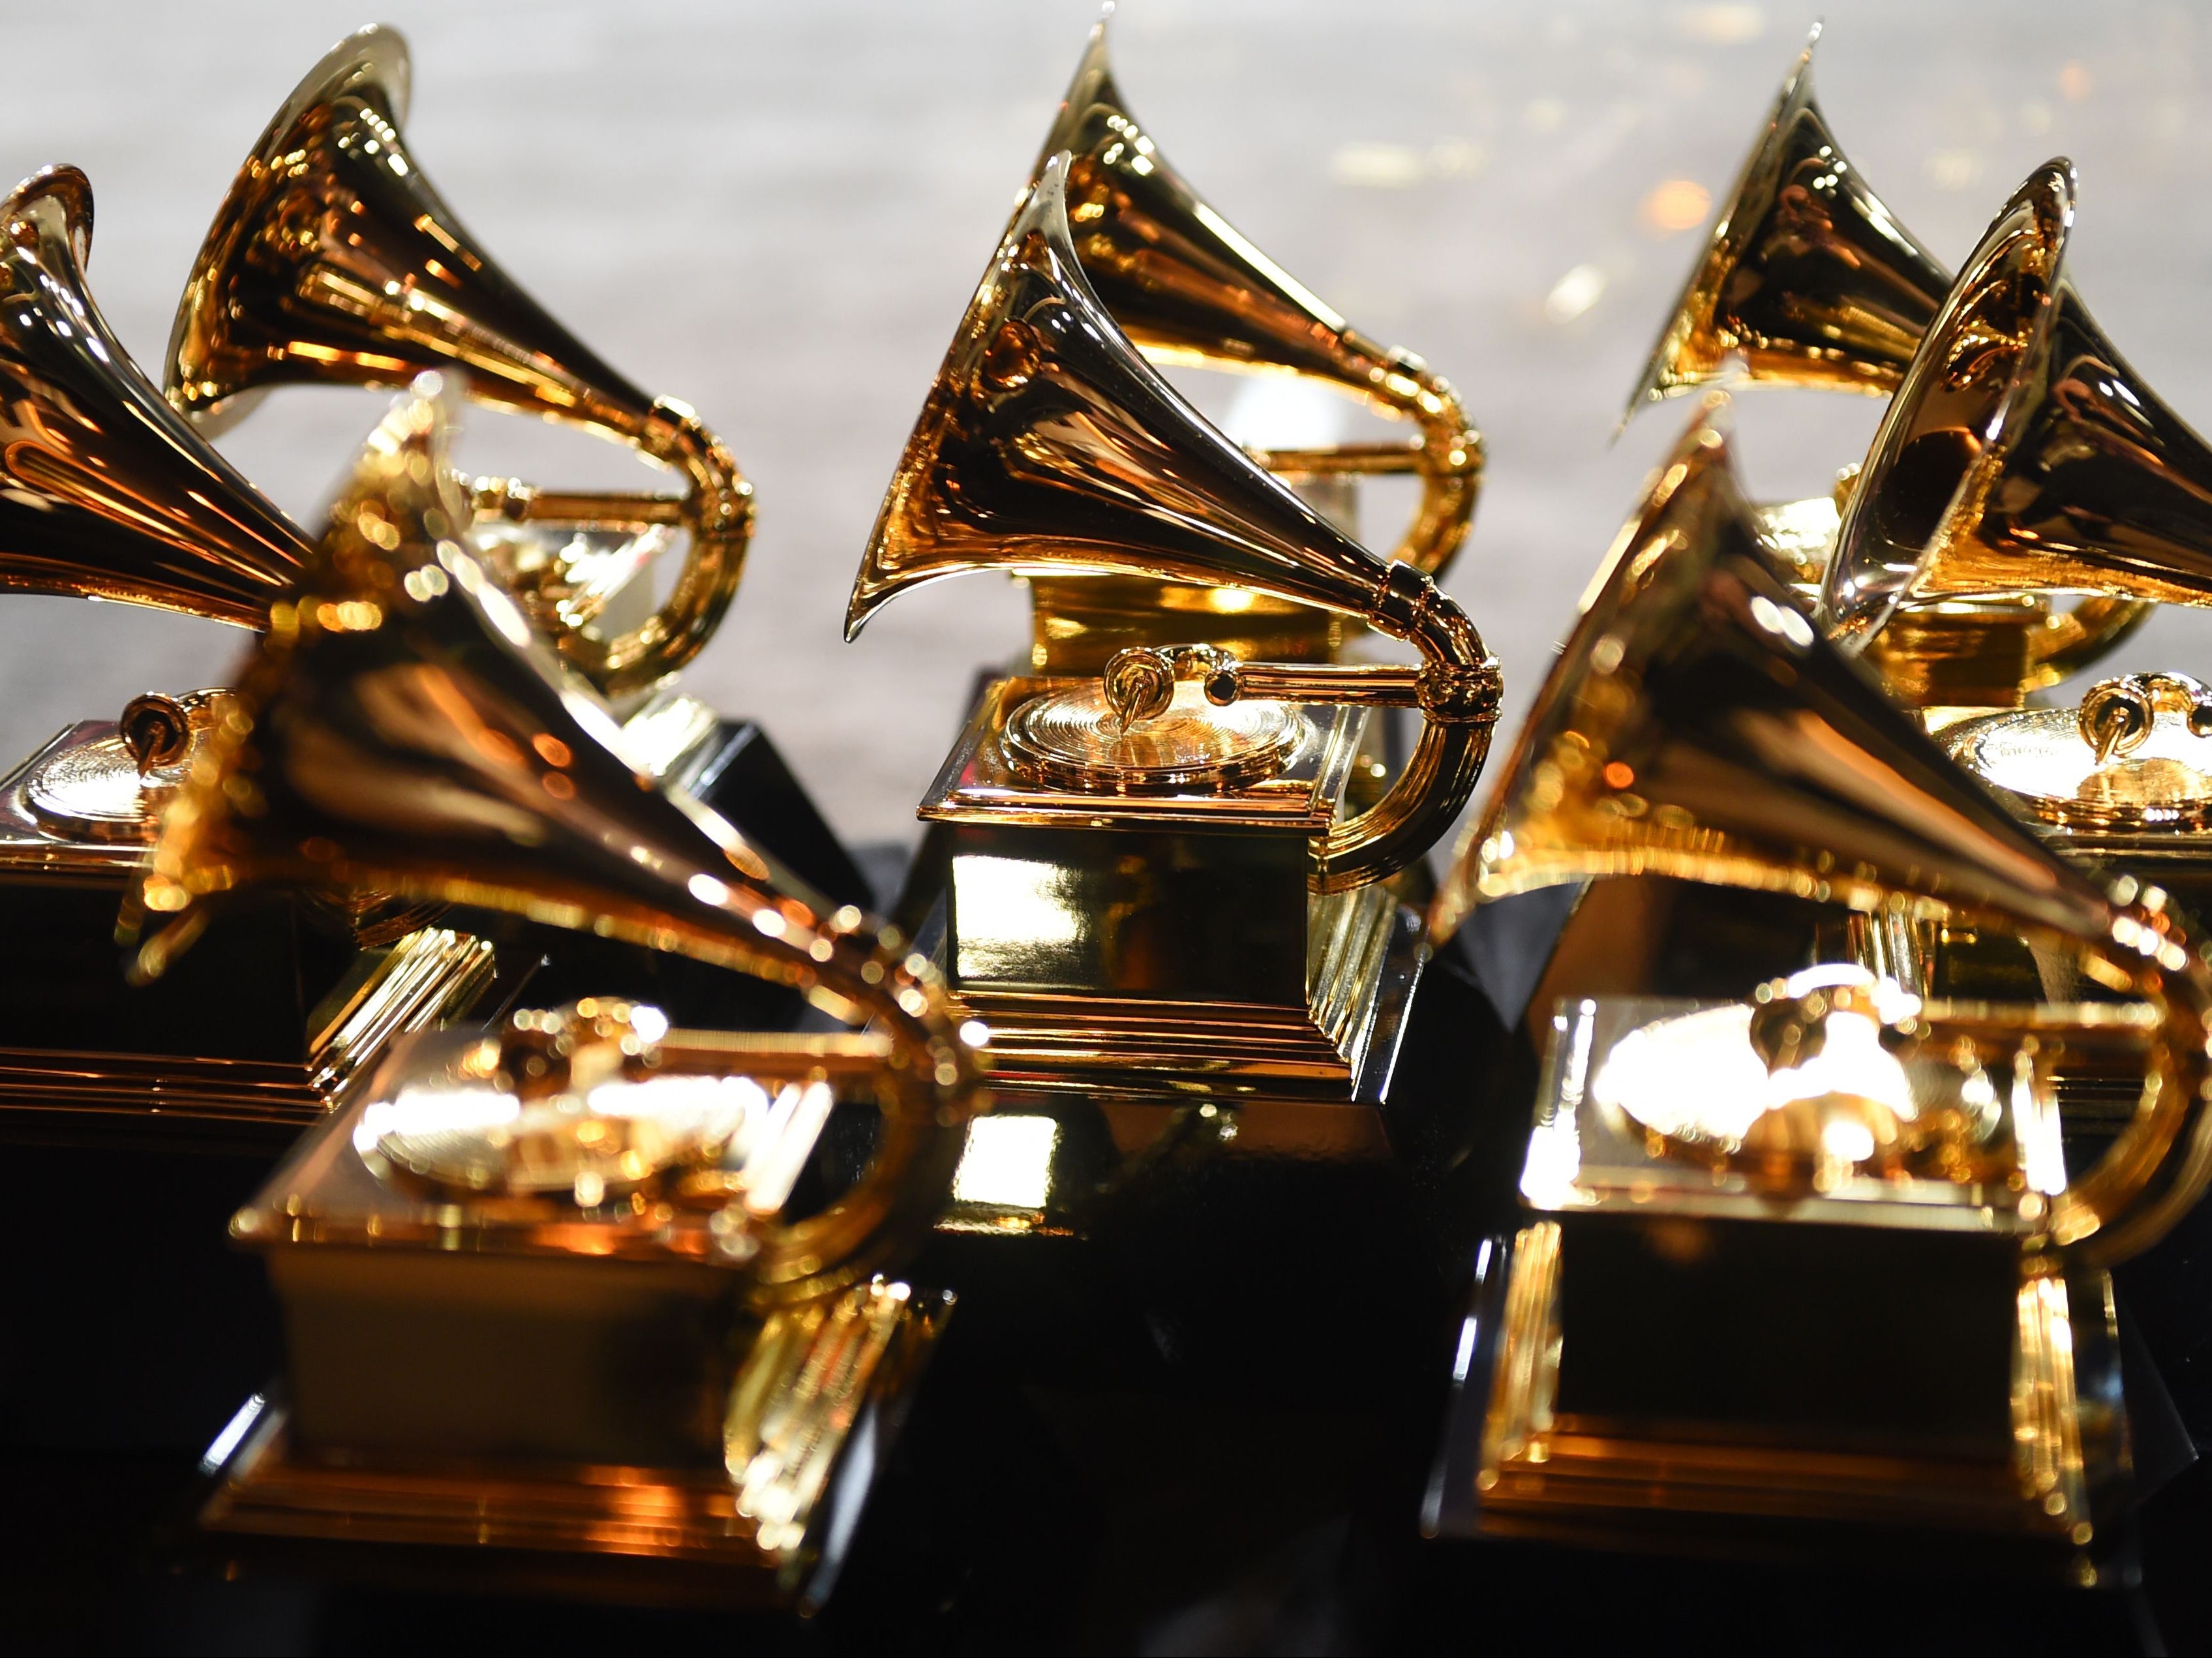 2021 Grammy Awards postponed due to Covid concerns.